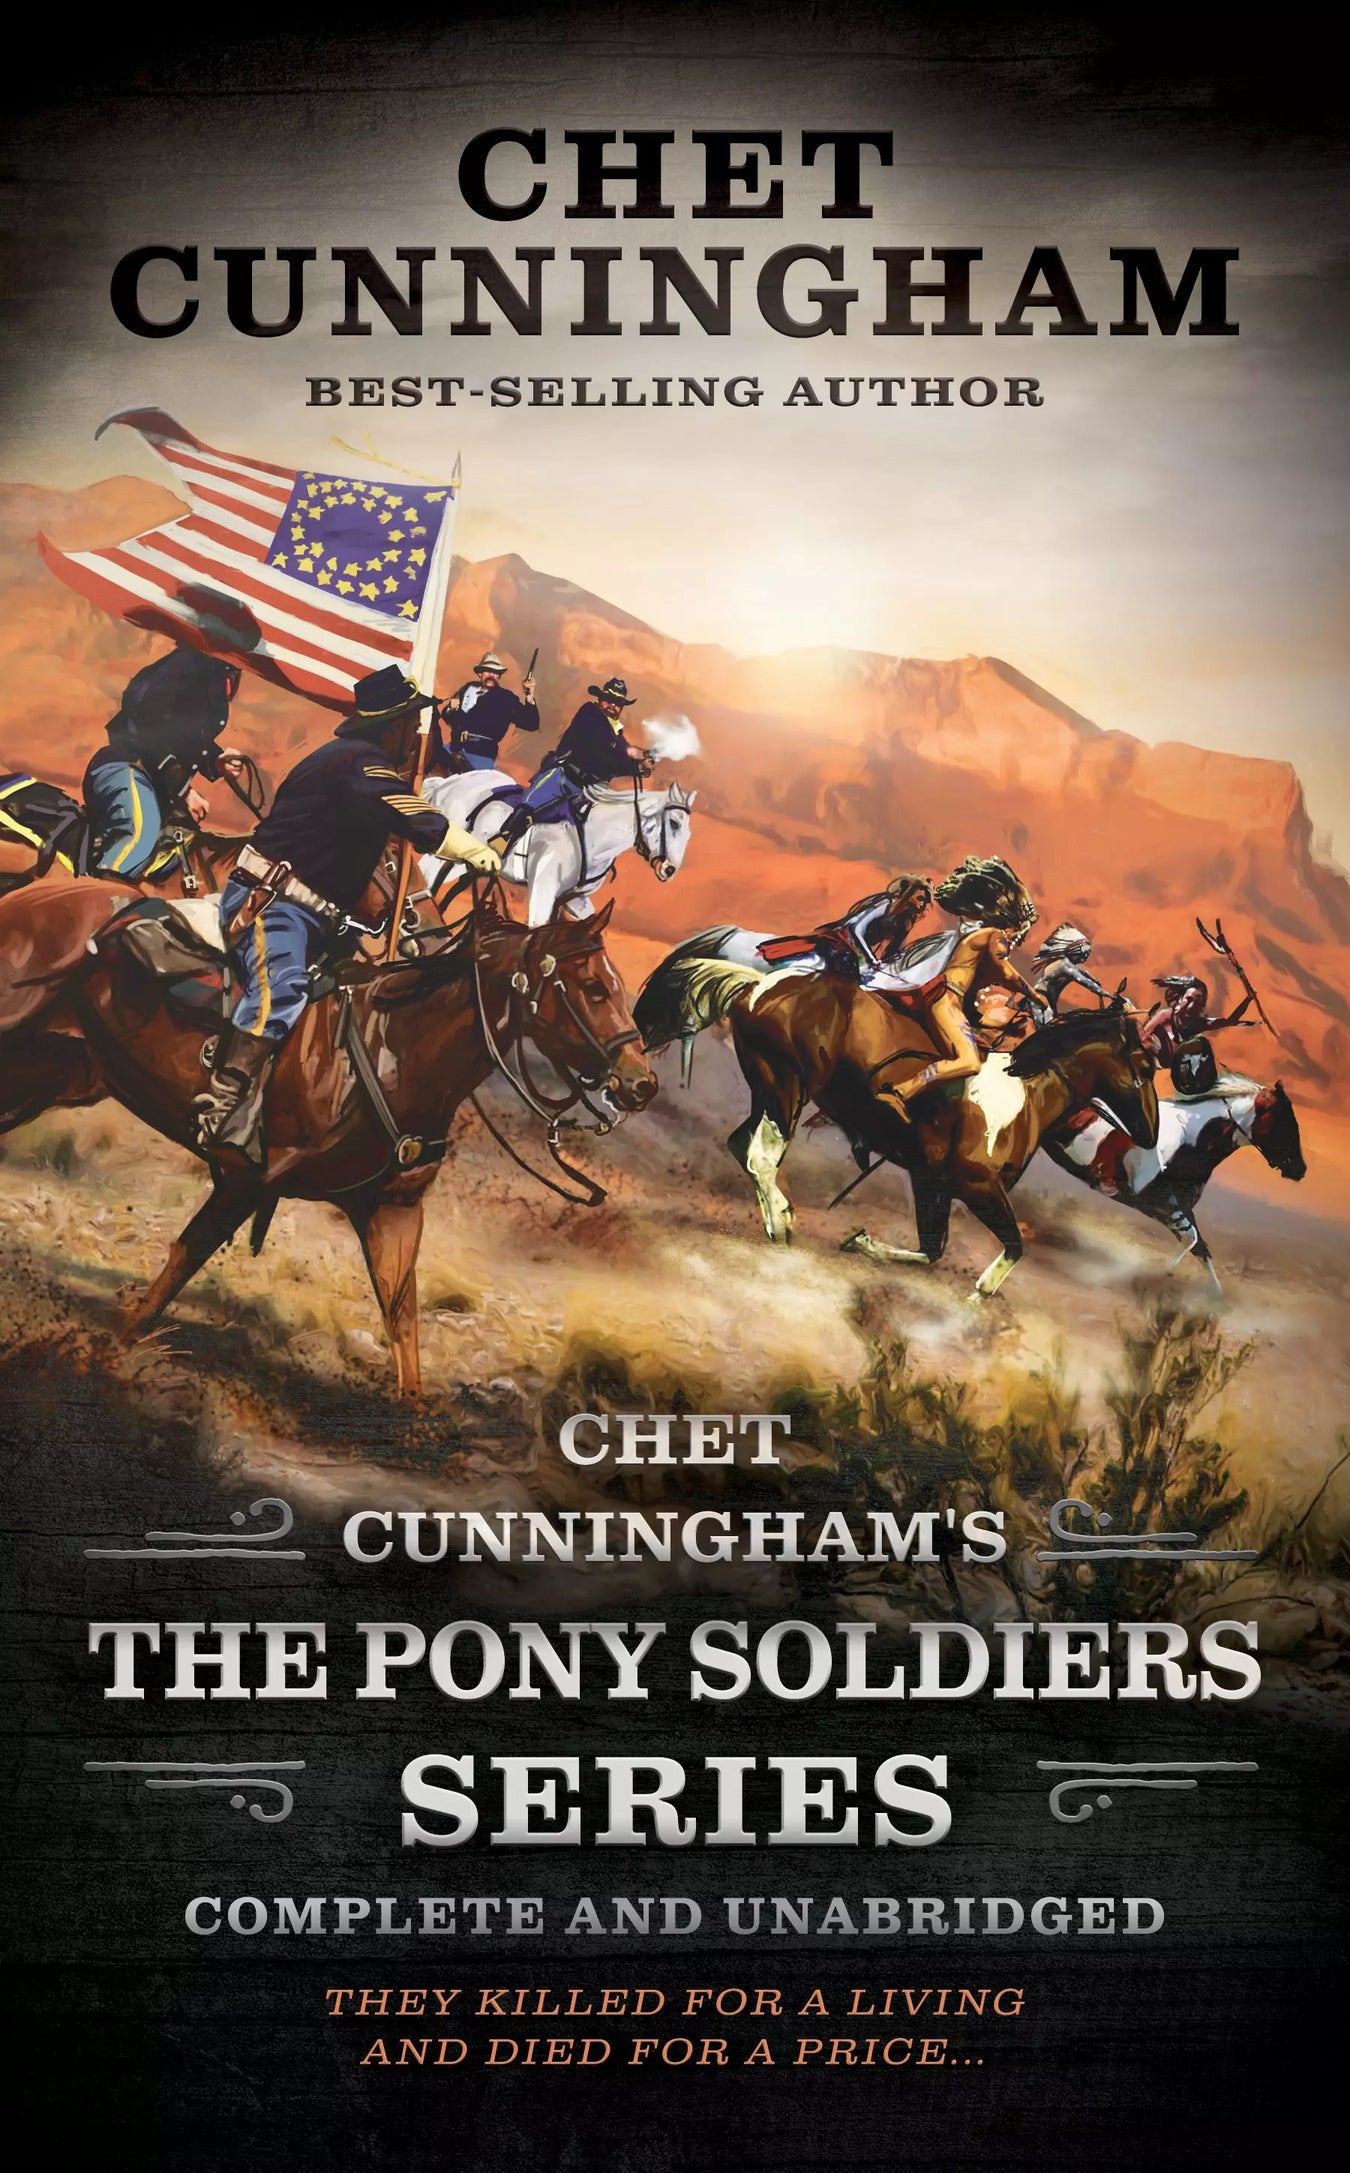 The Pony Soldiers